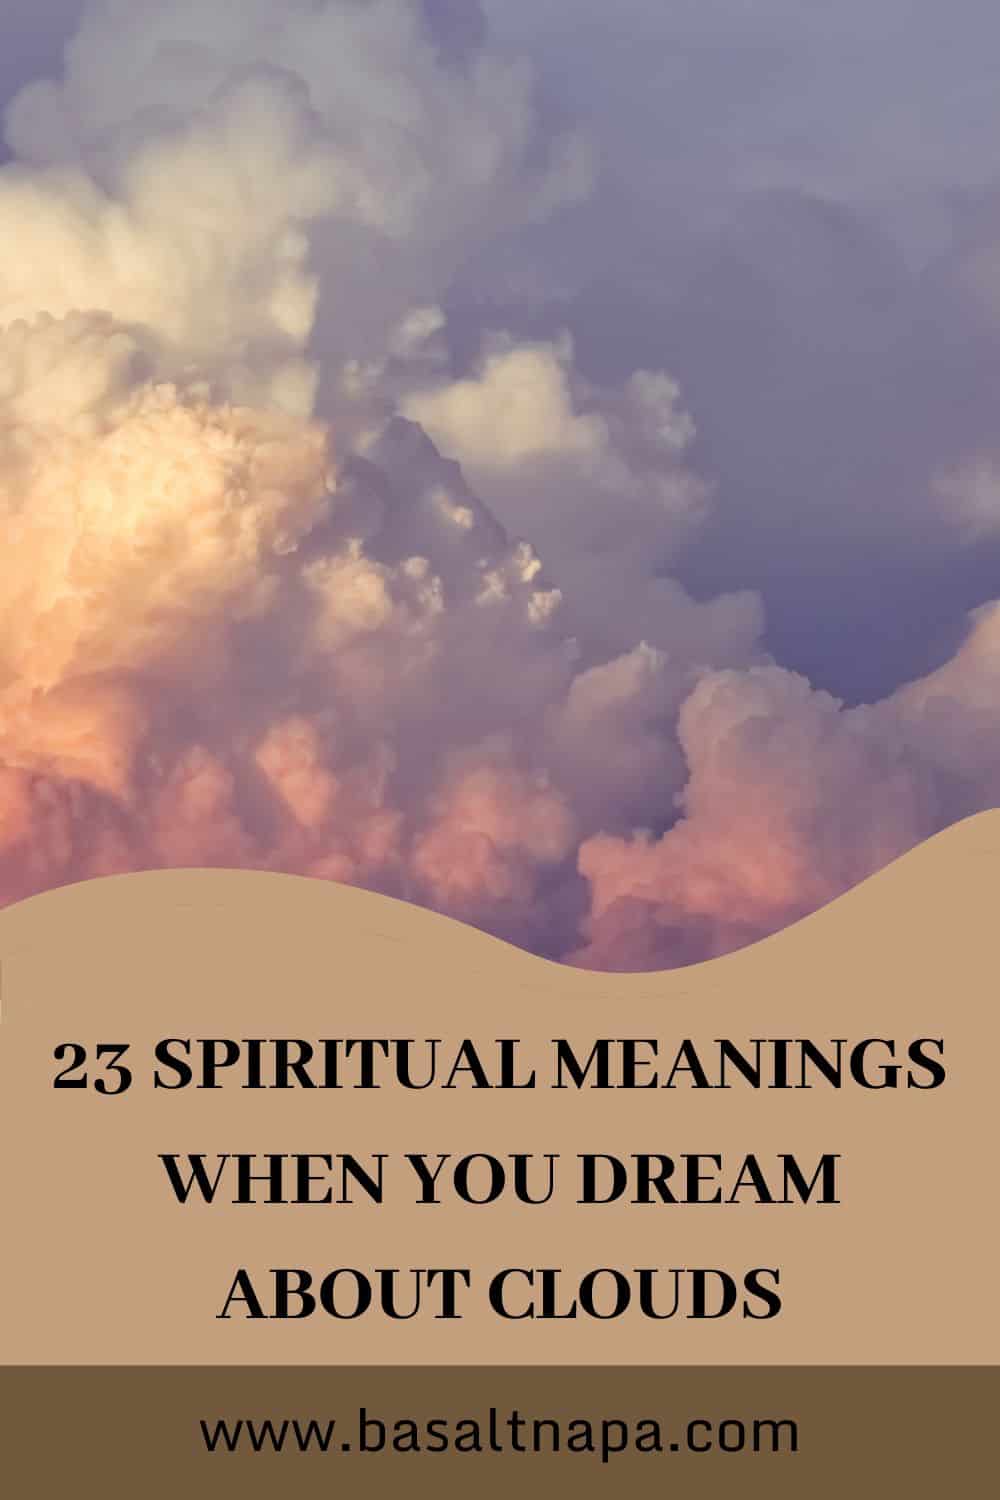 23 Spiritual Meanings When You Dream About Clouds